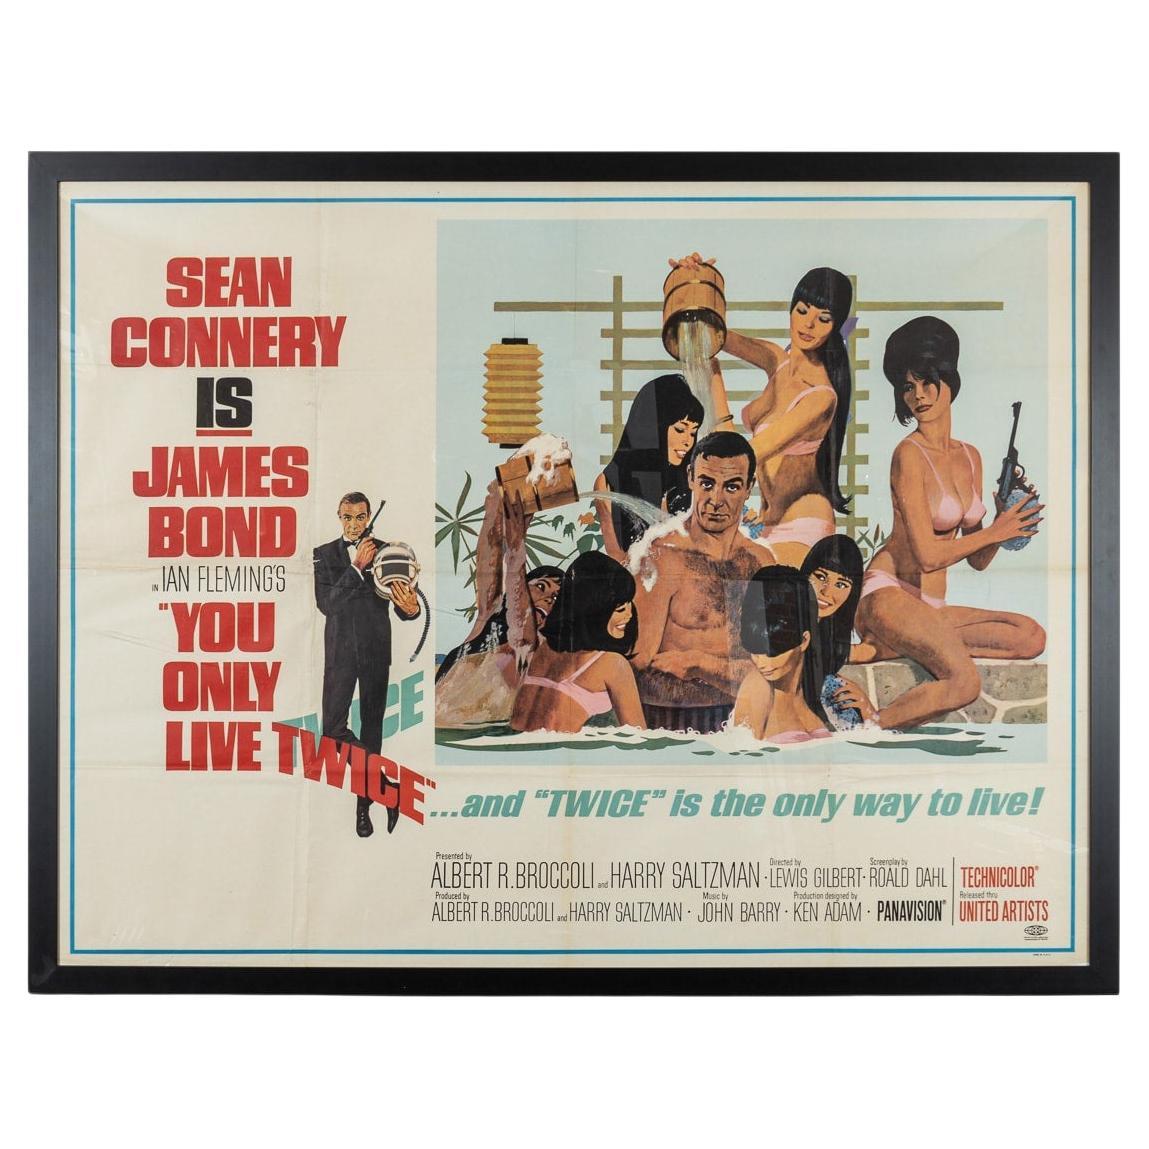 Original U.S Release James Bond 007 'You Only Live Twice' Subway C Poster c.1967 For Sale